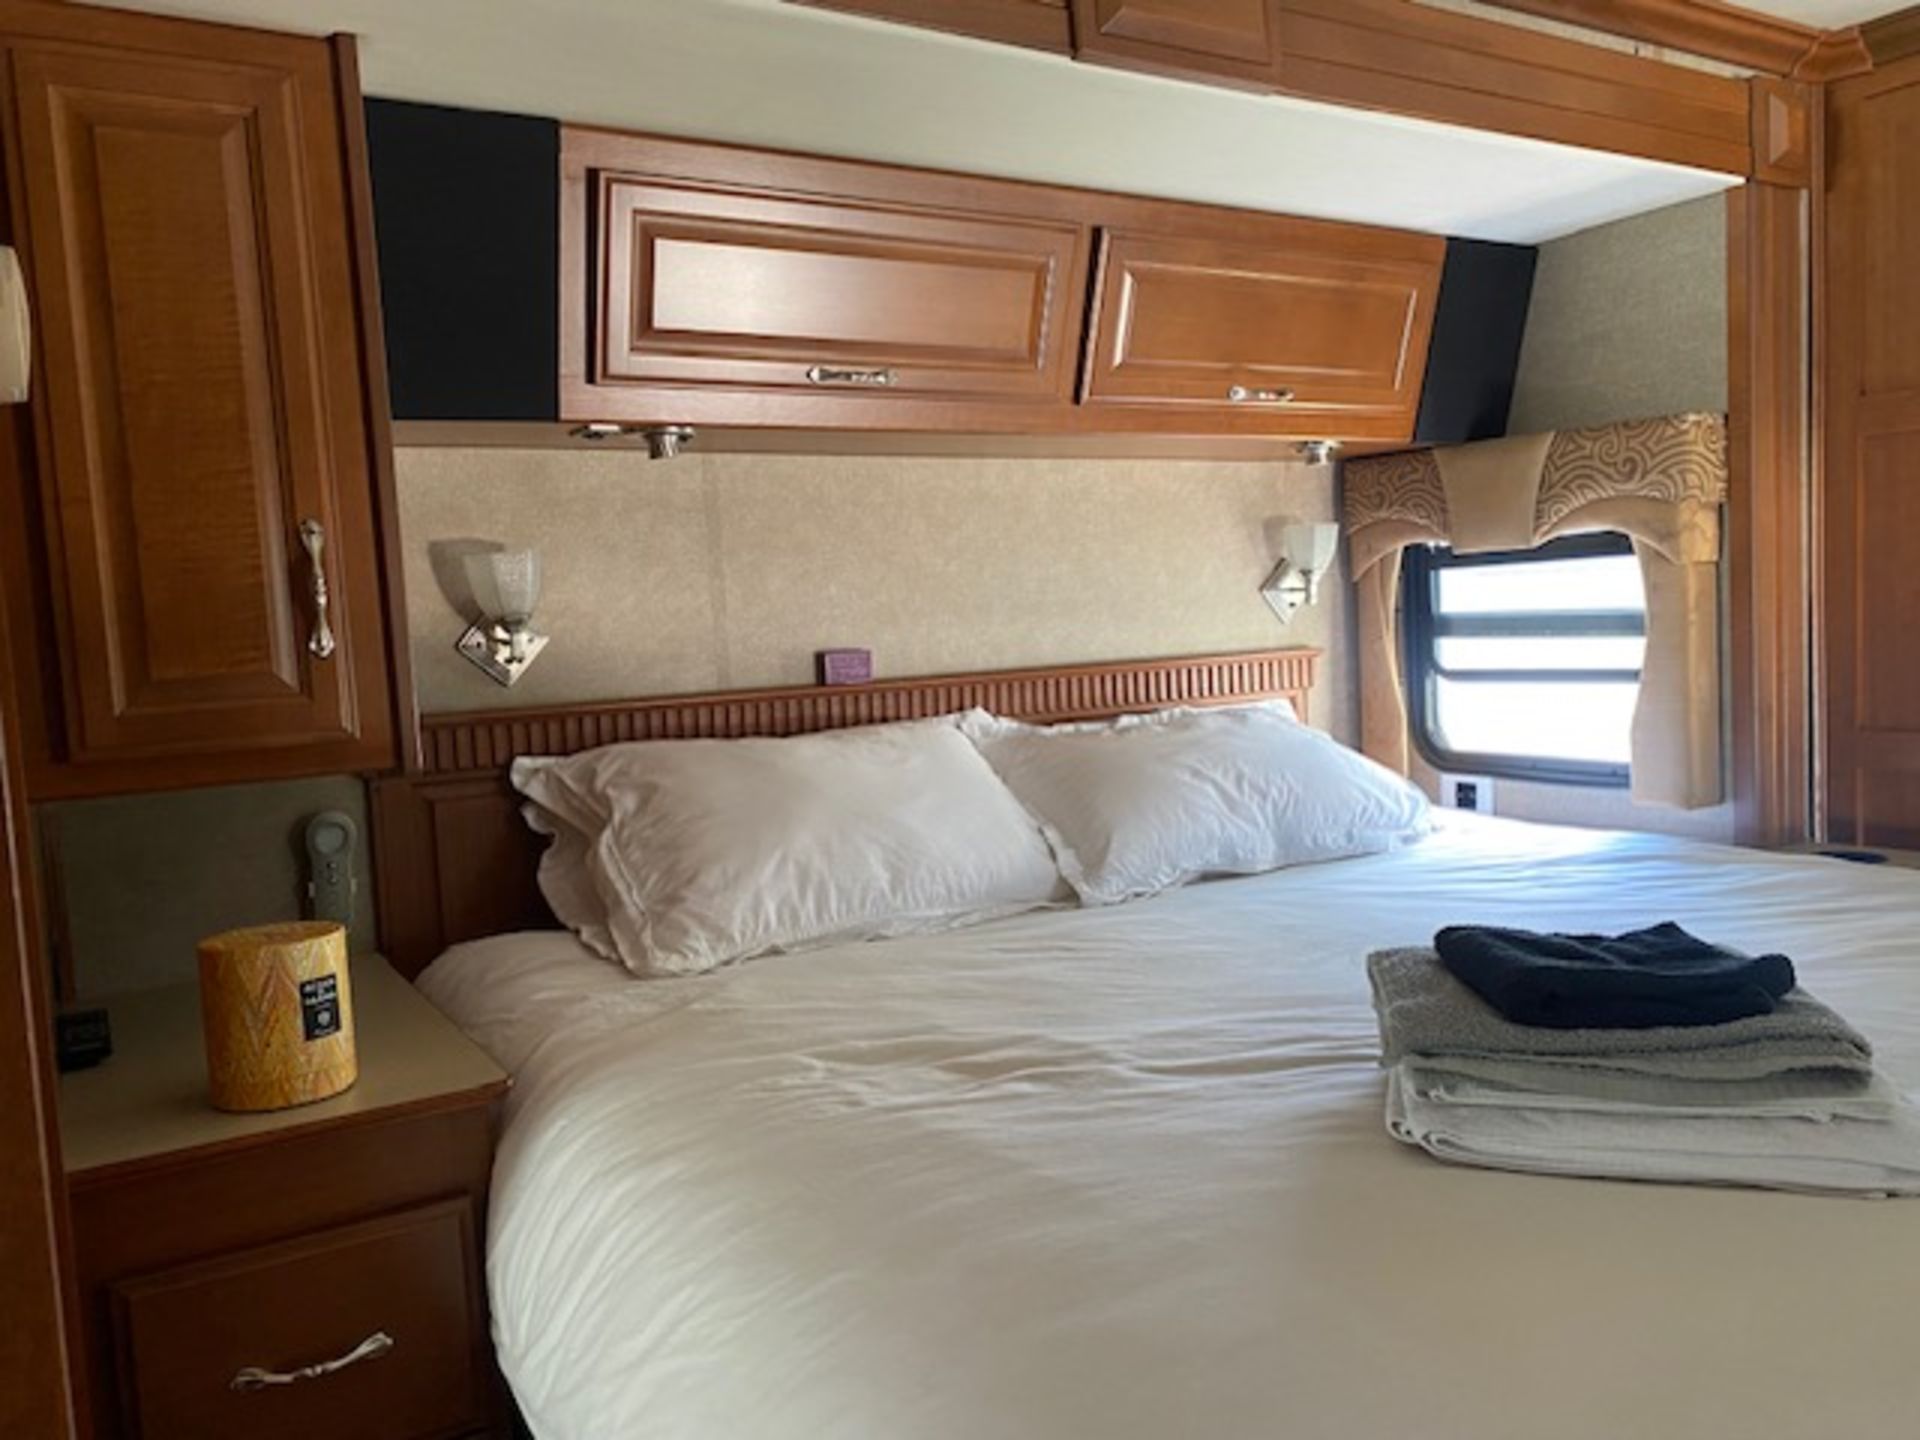 2010 FLEETWOOD DISCOVERY 40G AMERICAN MOTORHOME RV *NO VAT* - Image 19 of 39